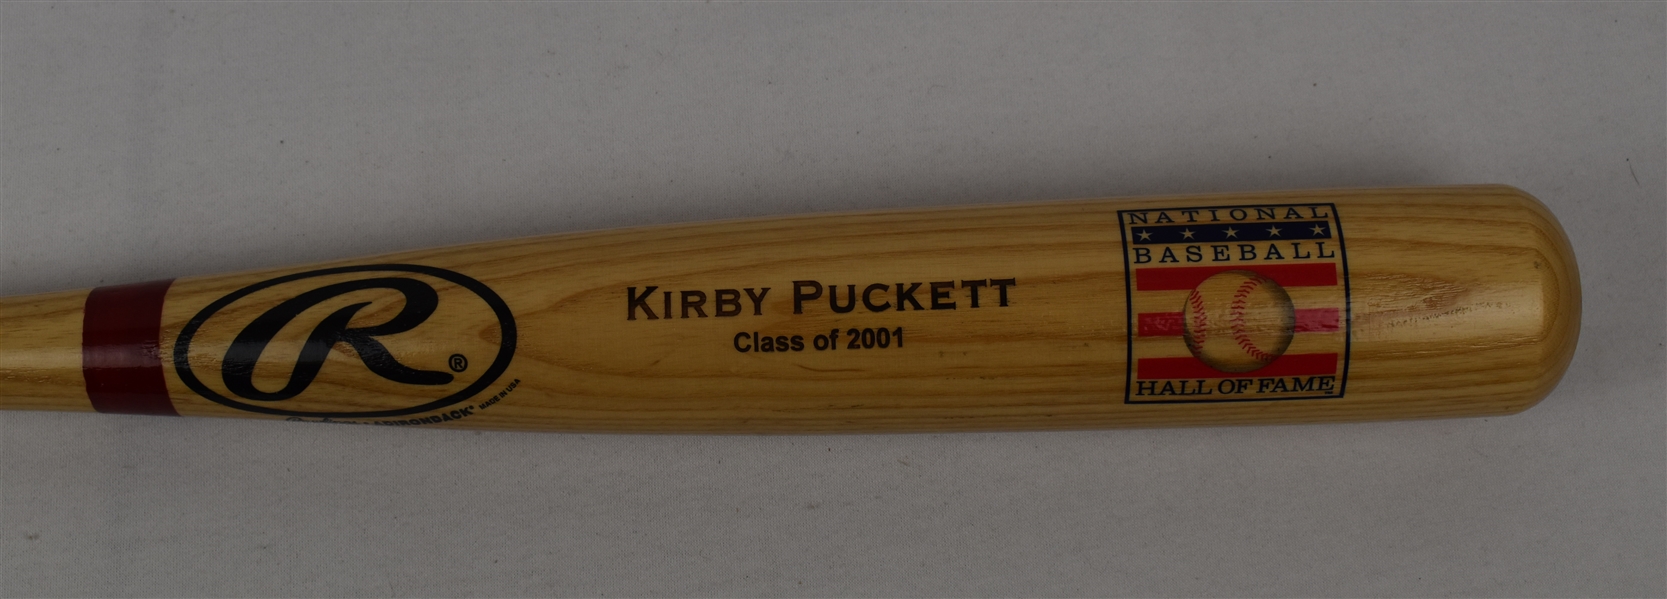 Kirby Puckett 2001 Hall of Fame Induction Engraved Bat